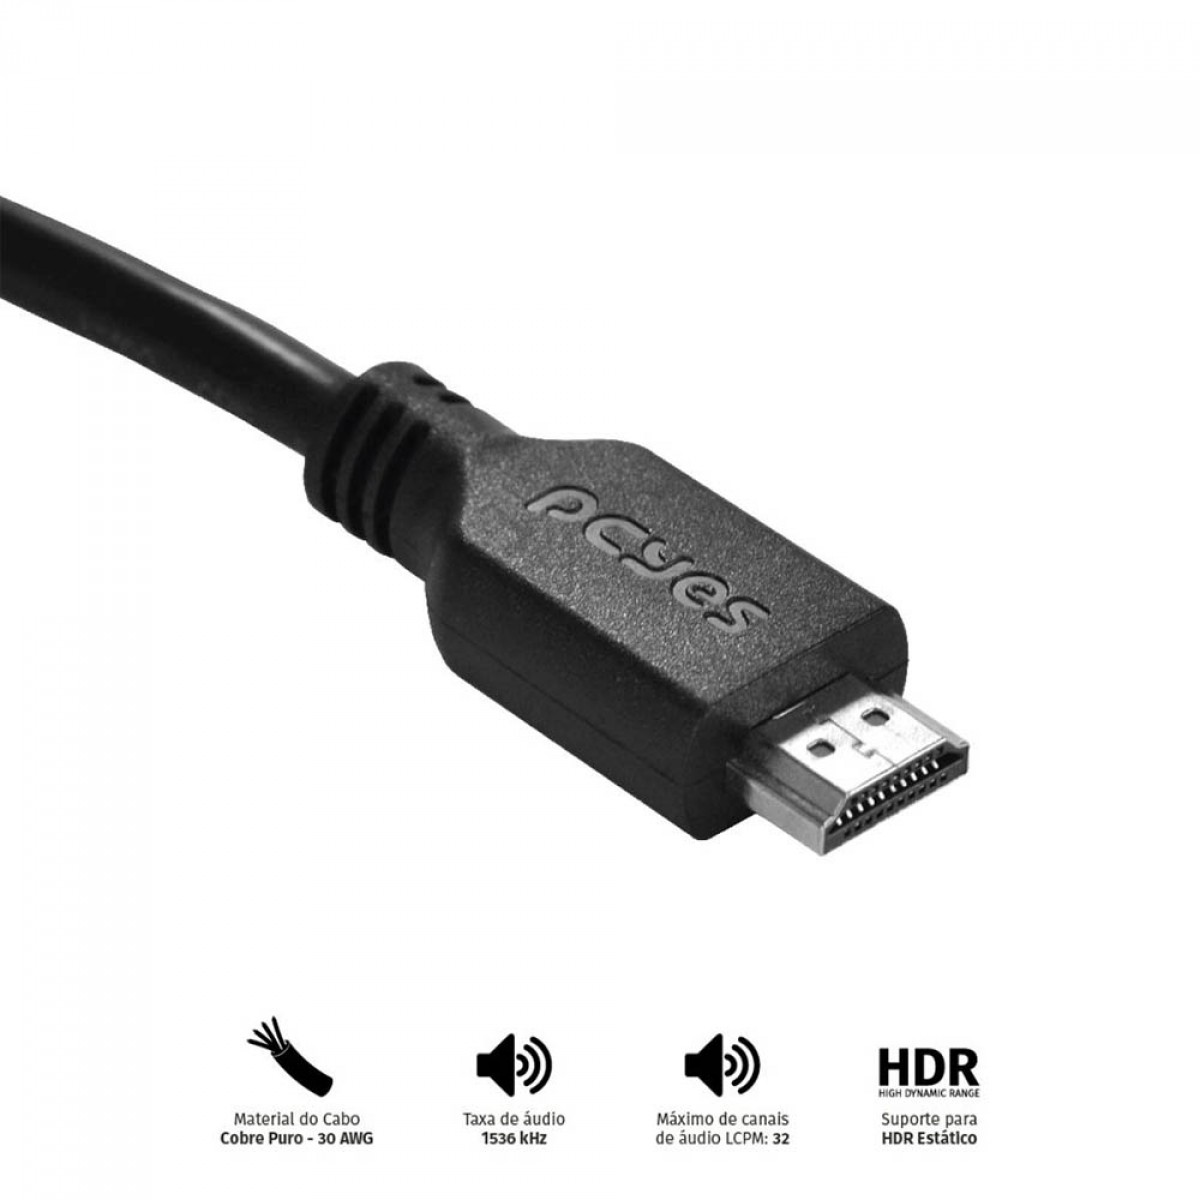 Cabo HDMI 2.0 PCYES, 4k 60Hz, 2m, PHM20-2